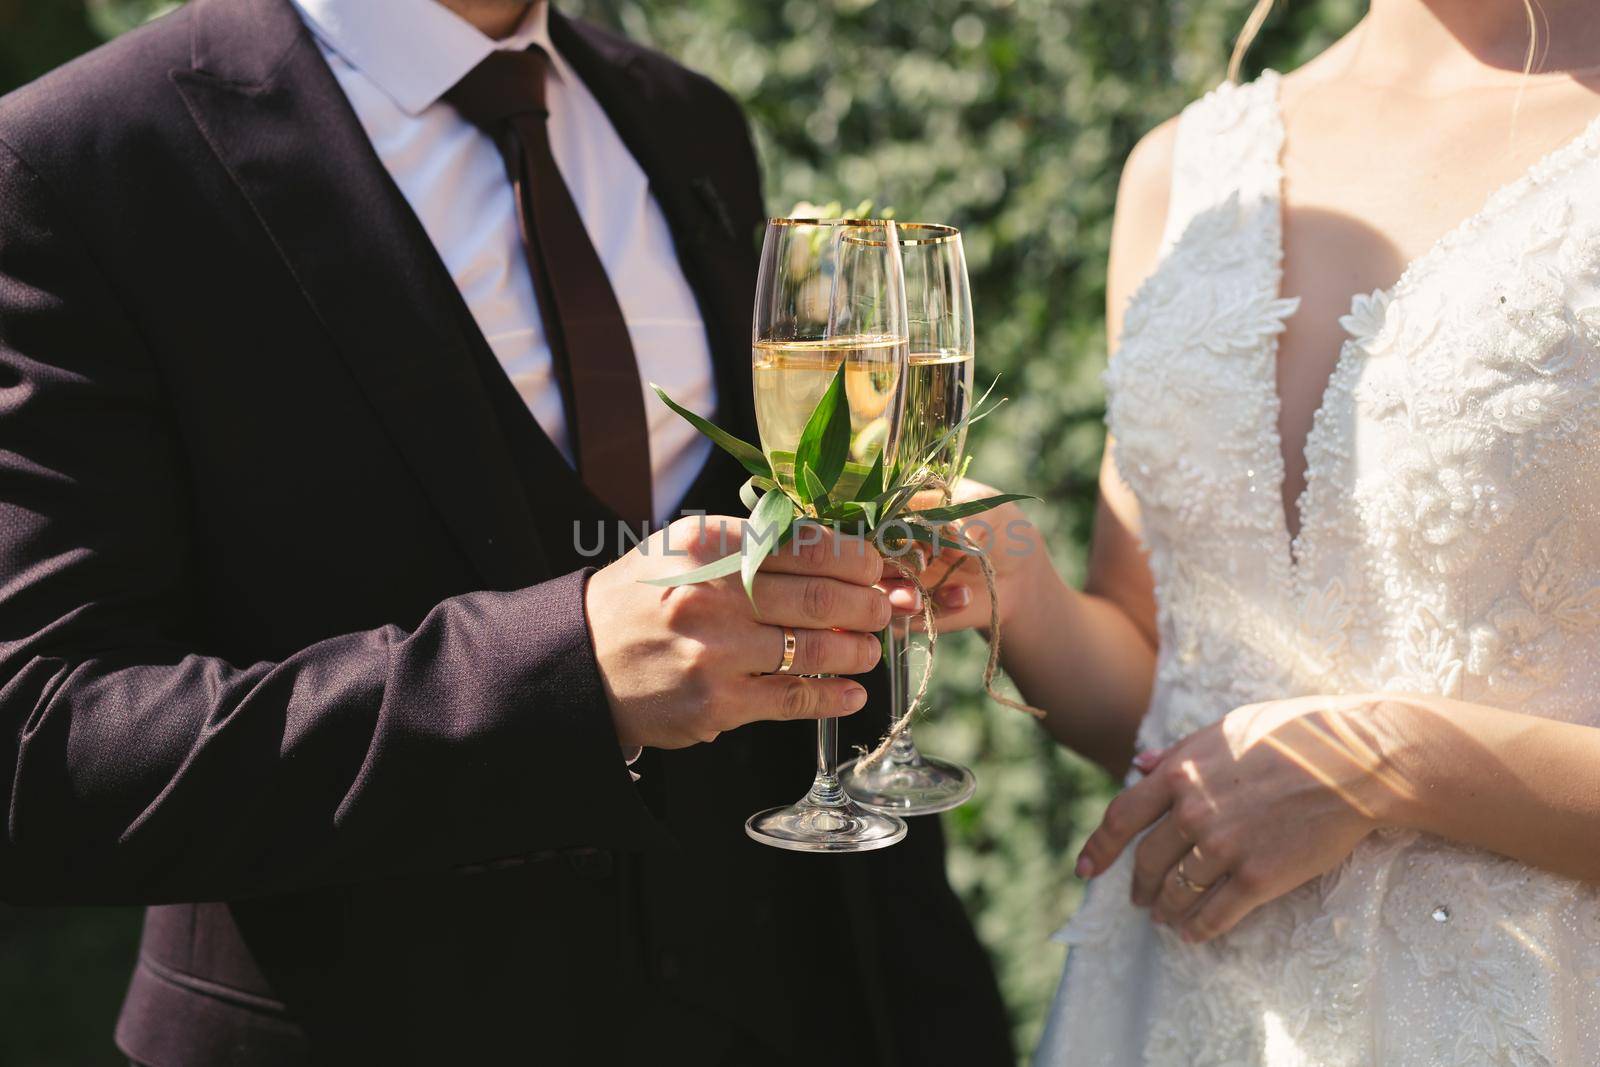 The bride and groom hold crystal glasses filled with champagne. by StudioPeace